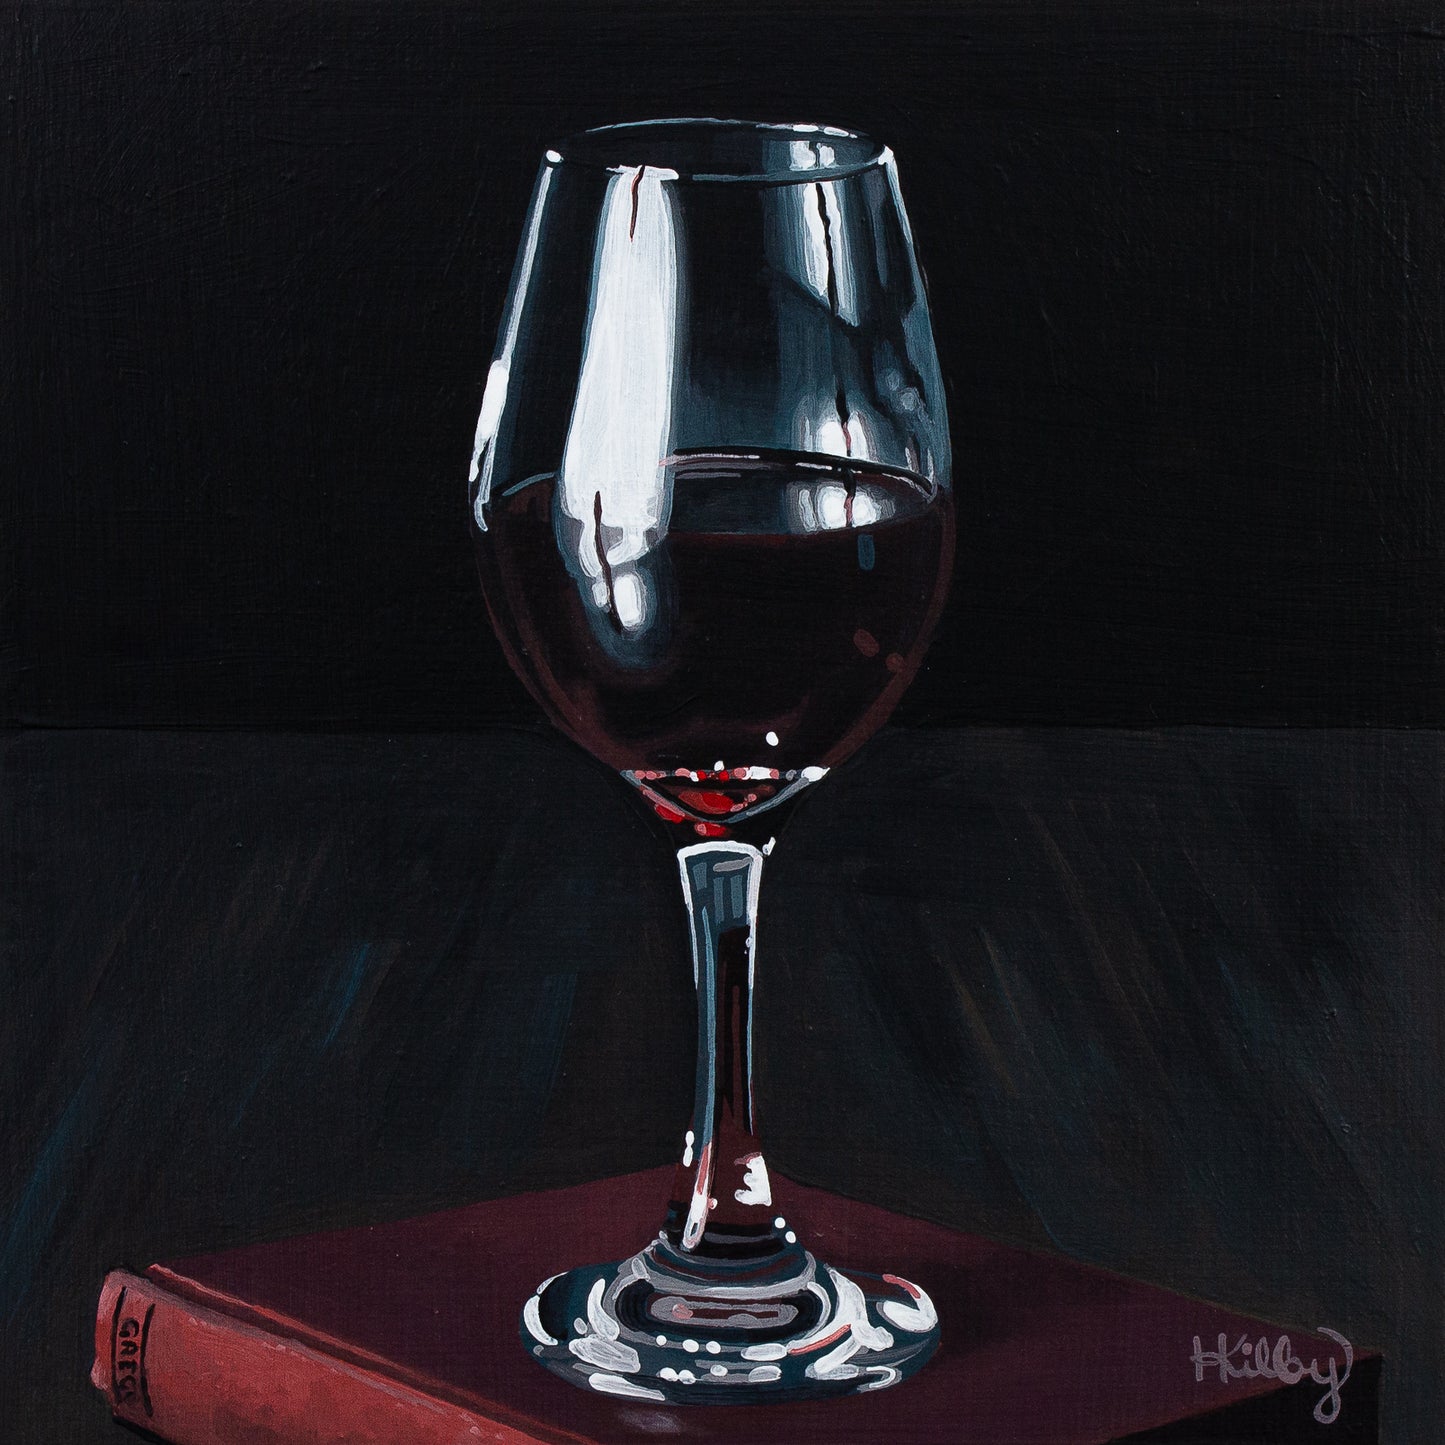 The original acrylic painting "Red Wine" by Hannah Kilby from Hannah Michelle Studios.